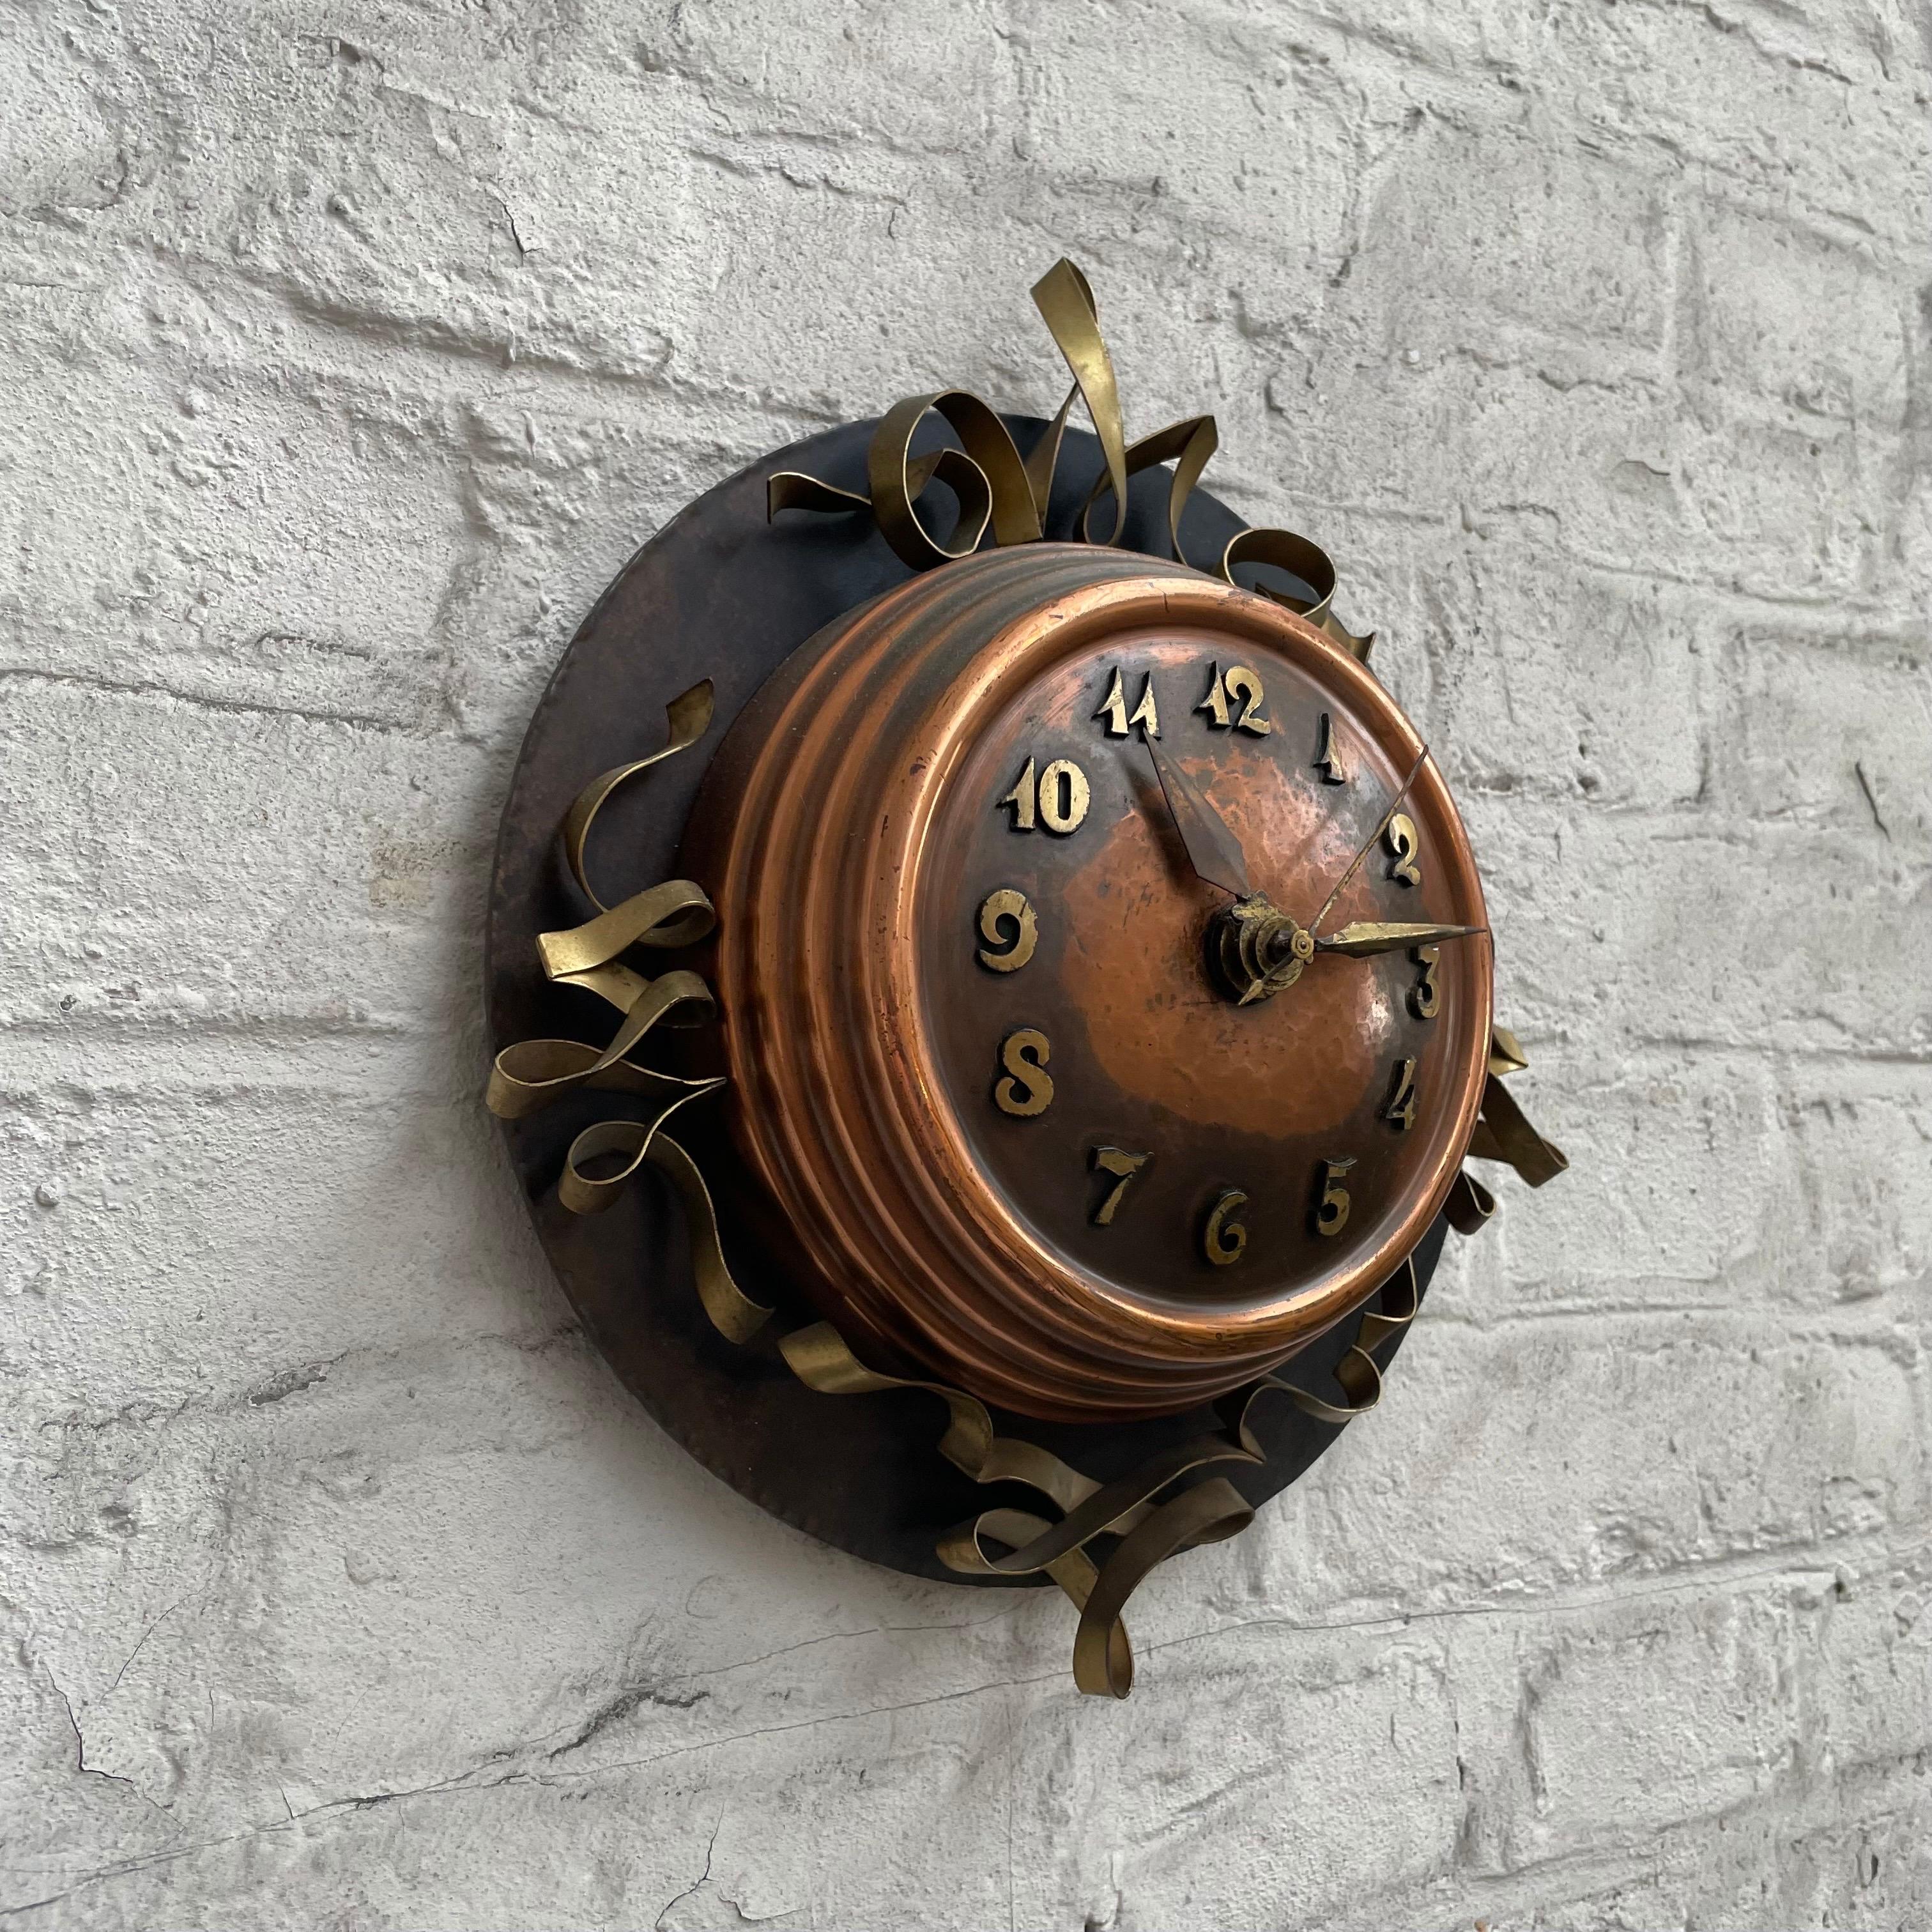 Amsterdamse School Art Deco Wall Clock, The Netherlands, 1930s.

Elegant and stylish wall clock in a distinct 'Amsterdamse School' or art deco style. A very decorative design with great tones and curly shapes. The hand hammered middle part in